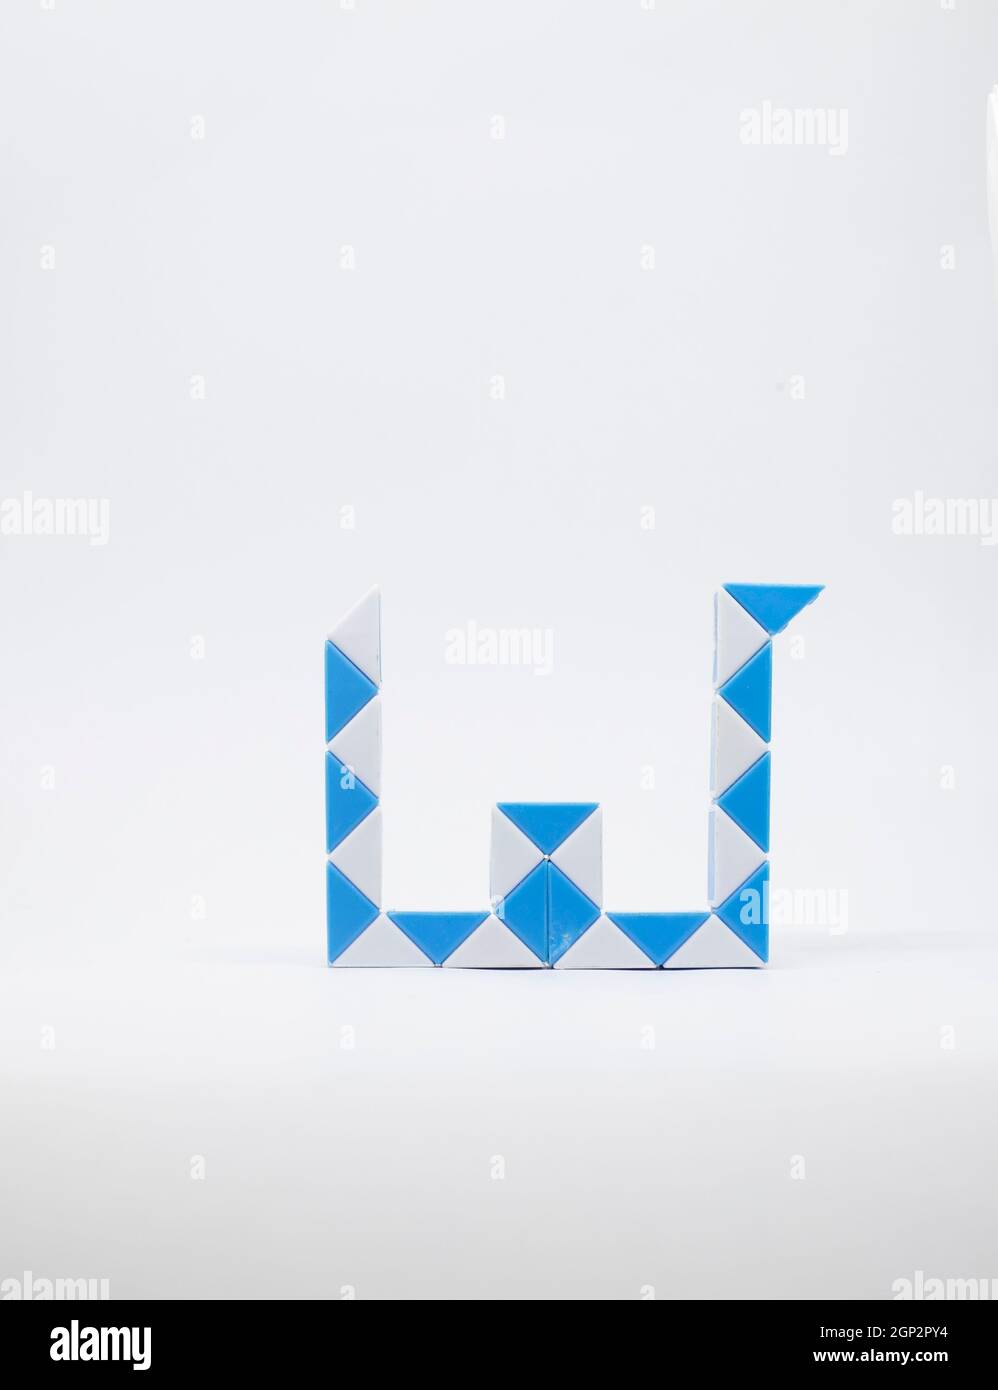 Letter 'w' made of blue and white triangles on a white background. Stock Photo